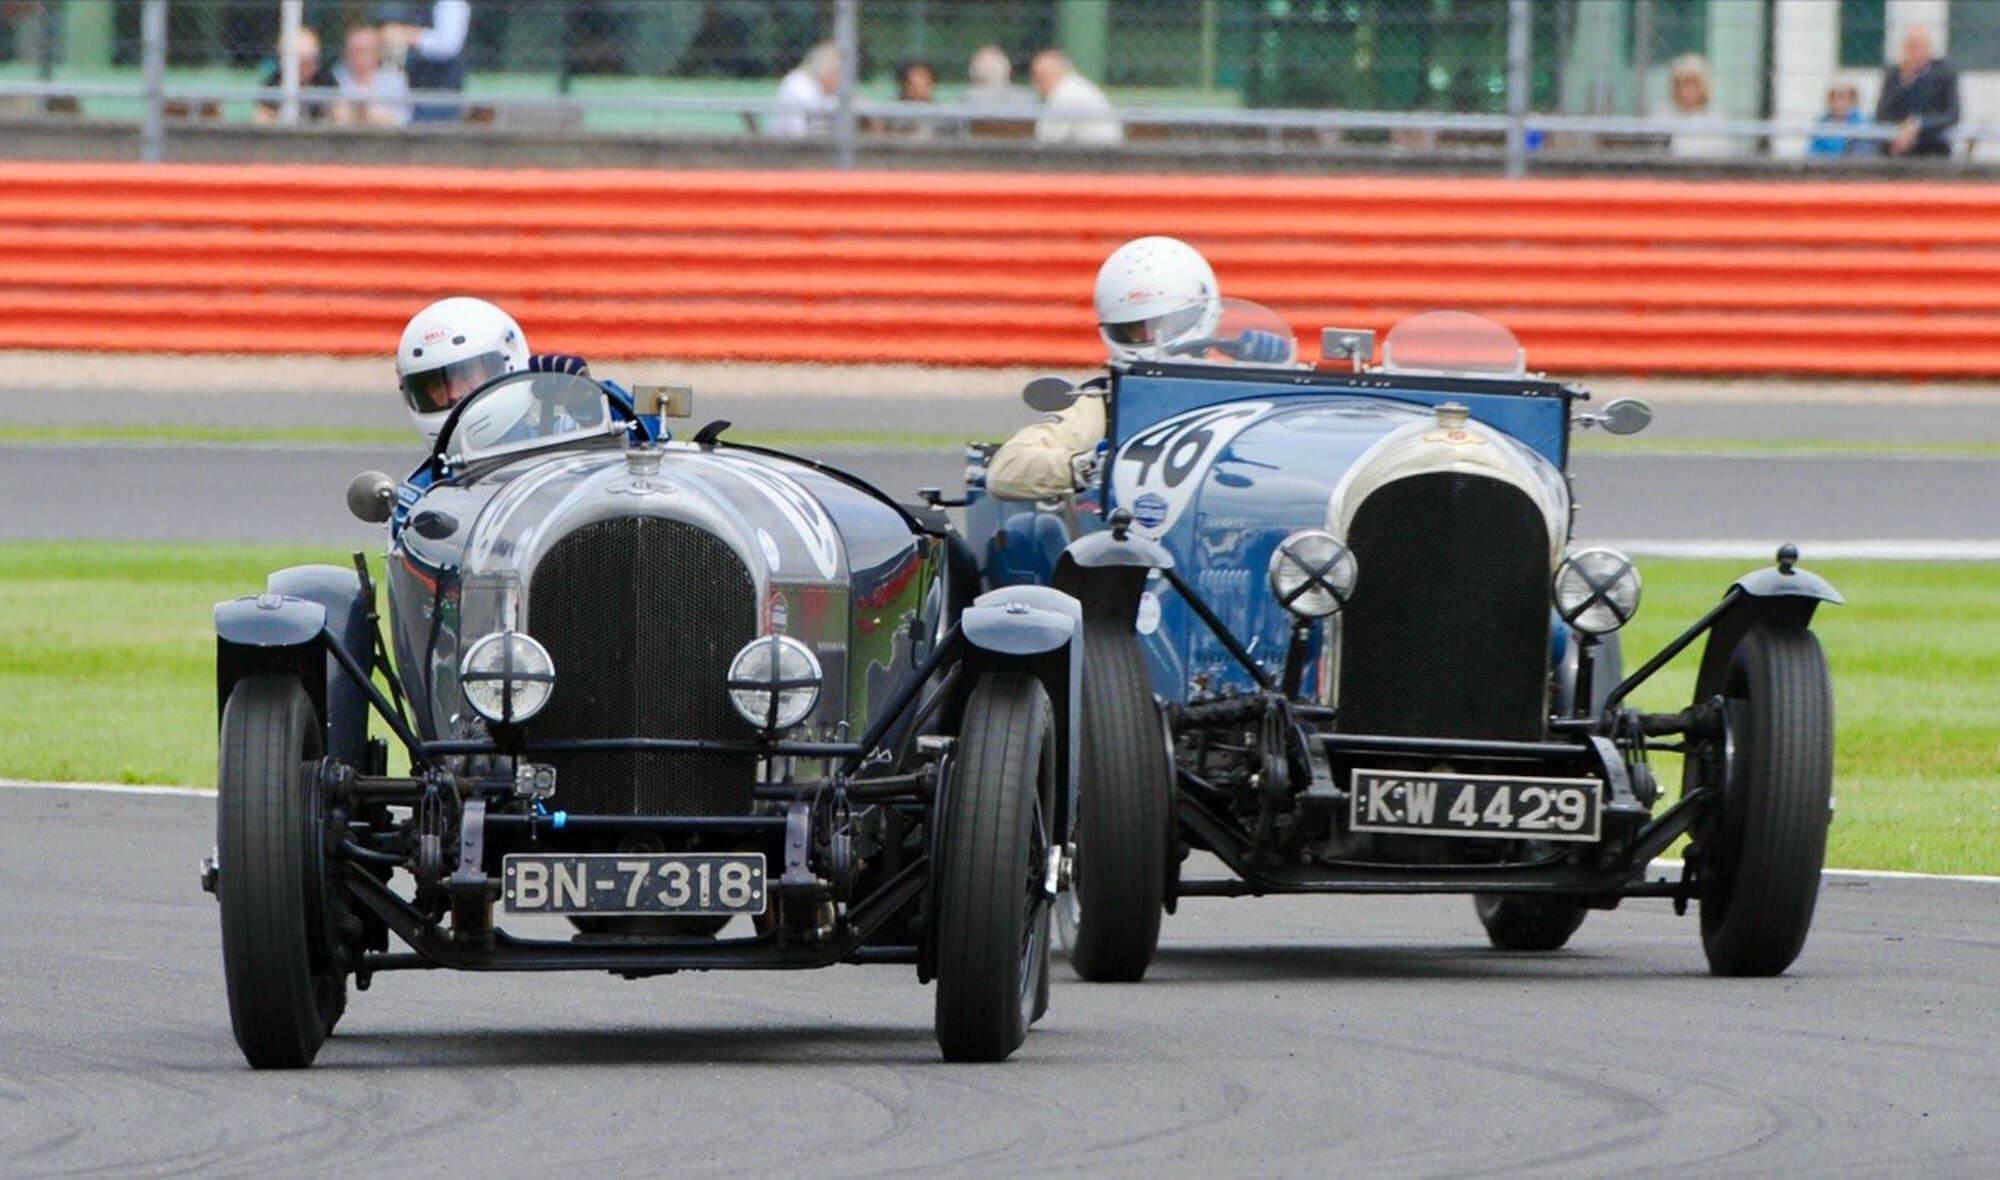 Two pre war sports cars competing in the pre war sports cars grid at The Classic at Silverstone